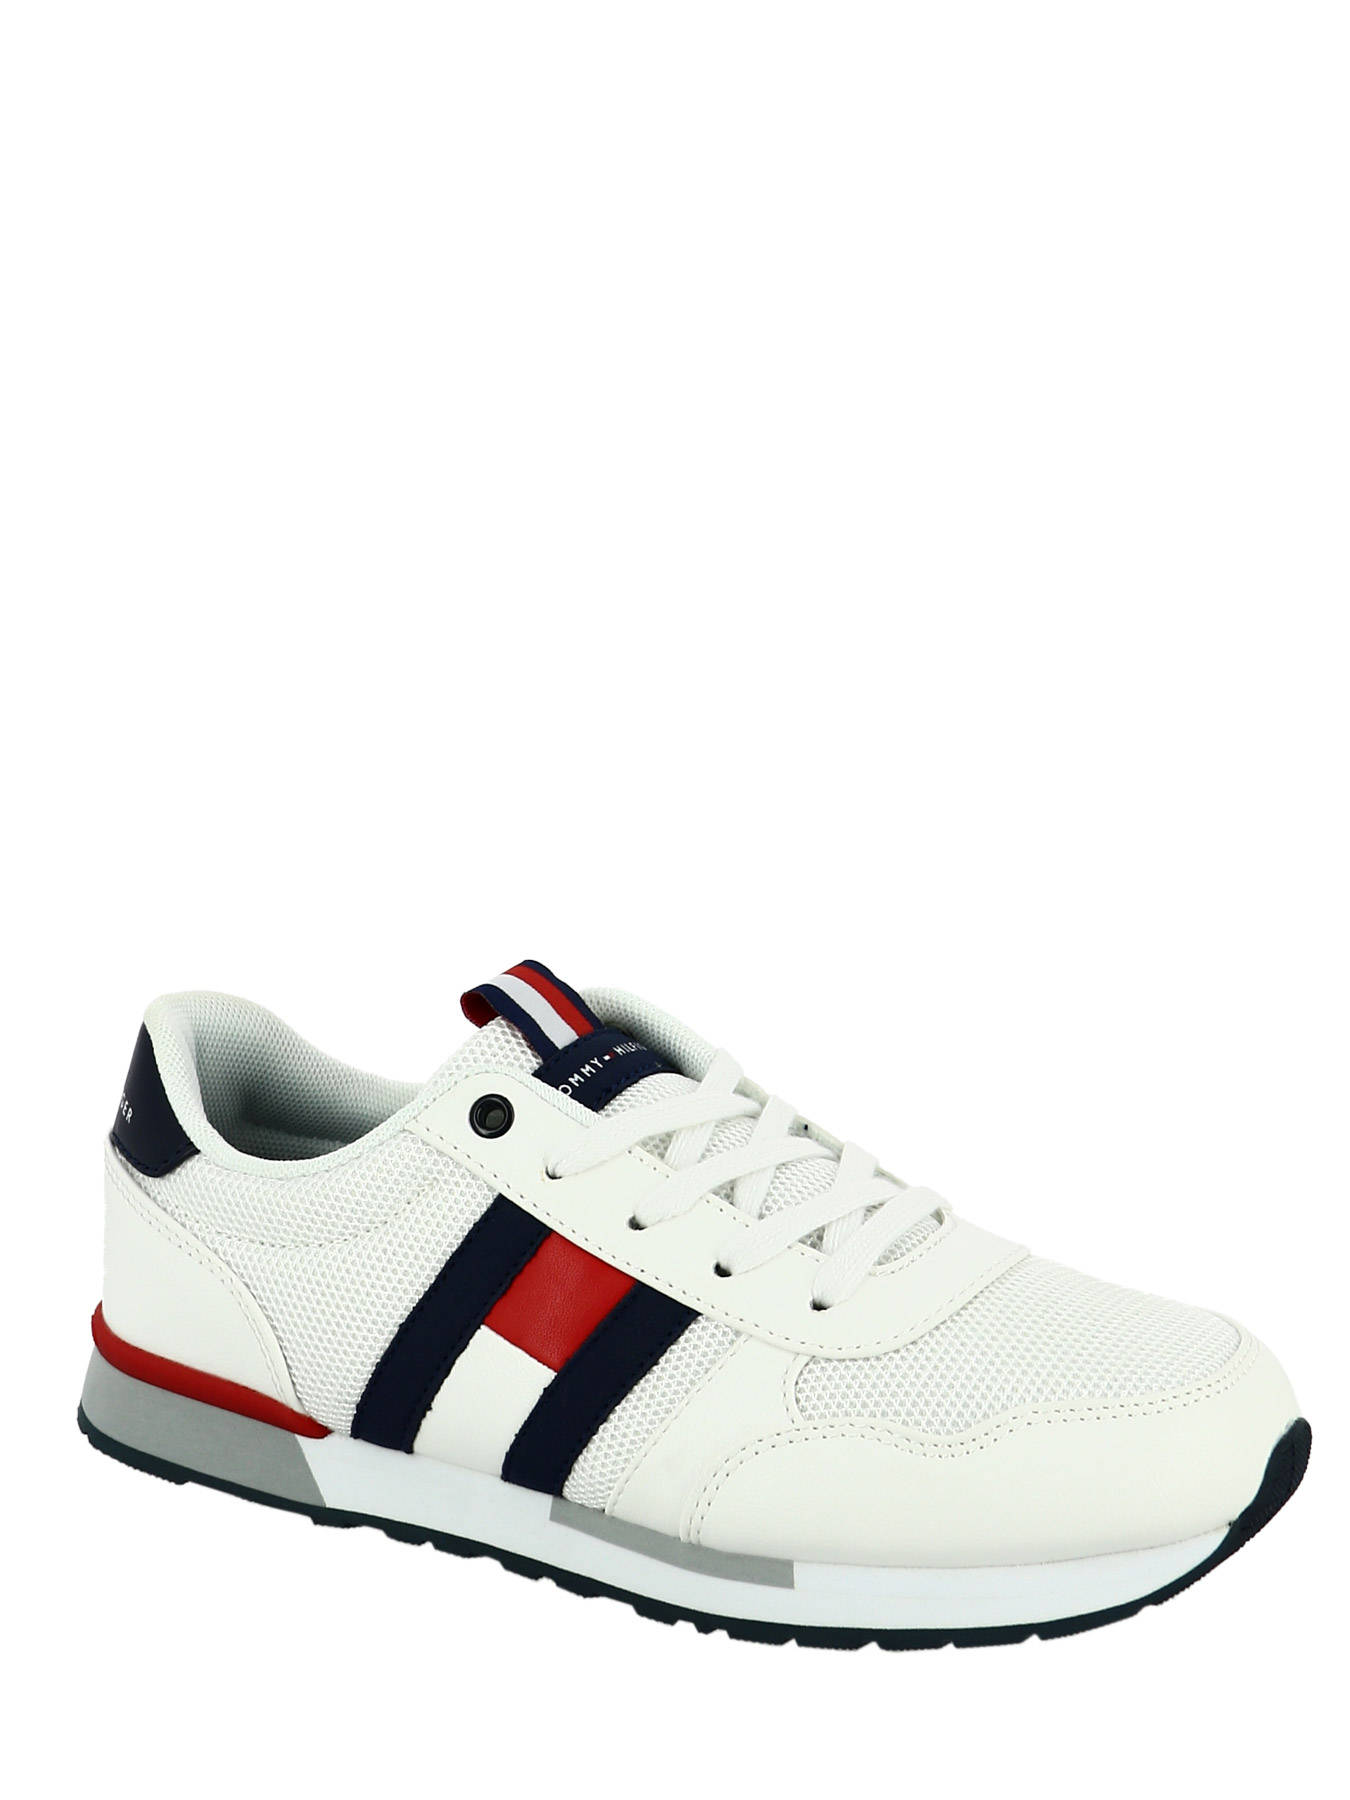 tommy hilfiger shoes mens price